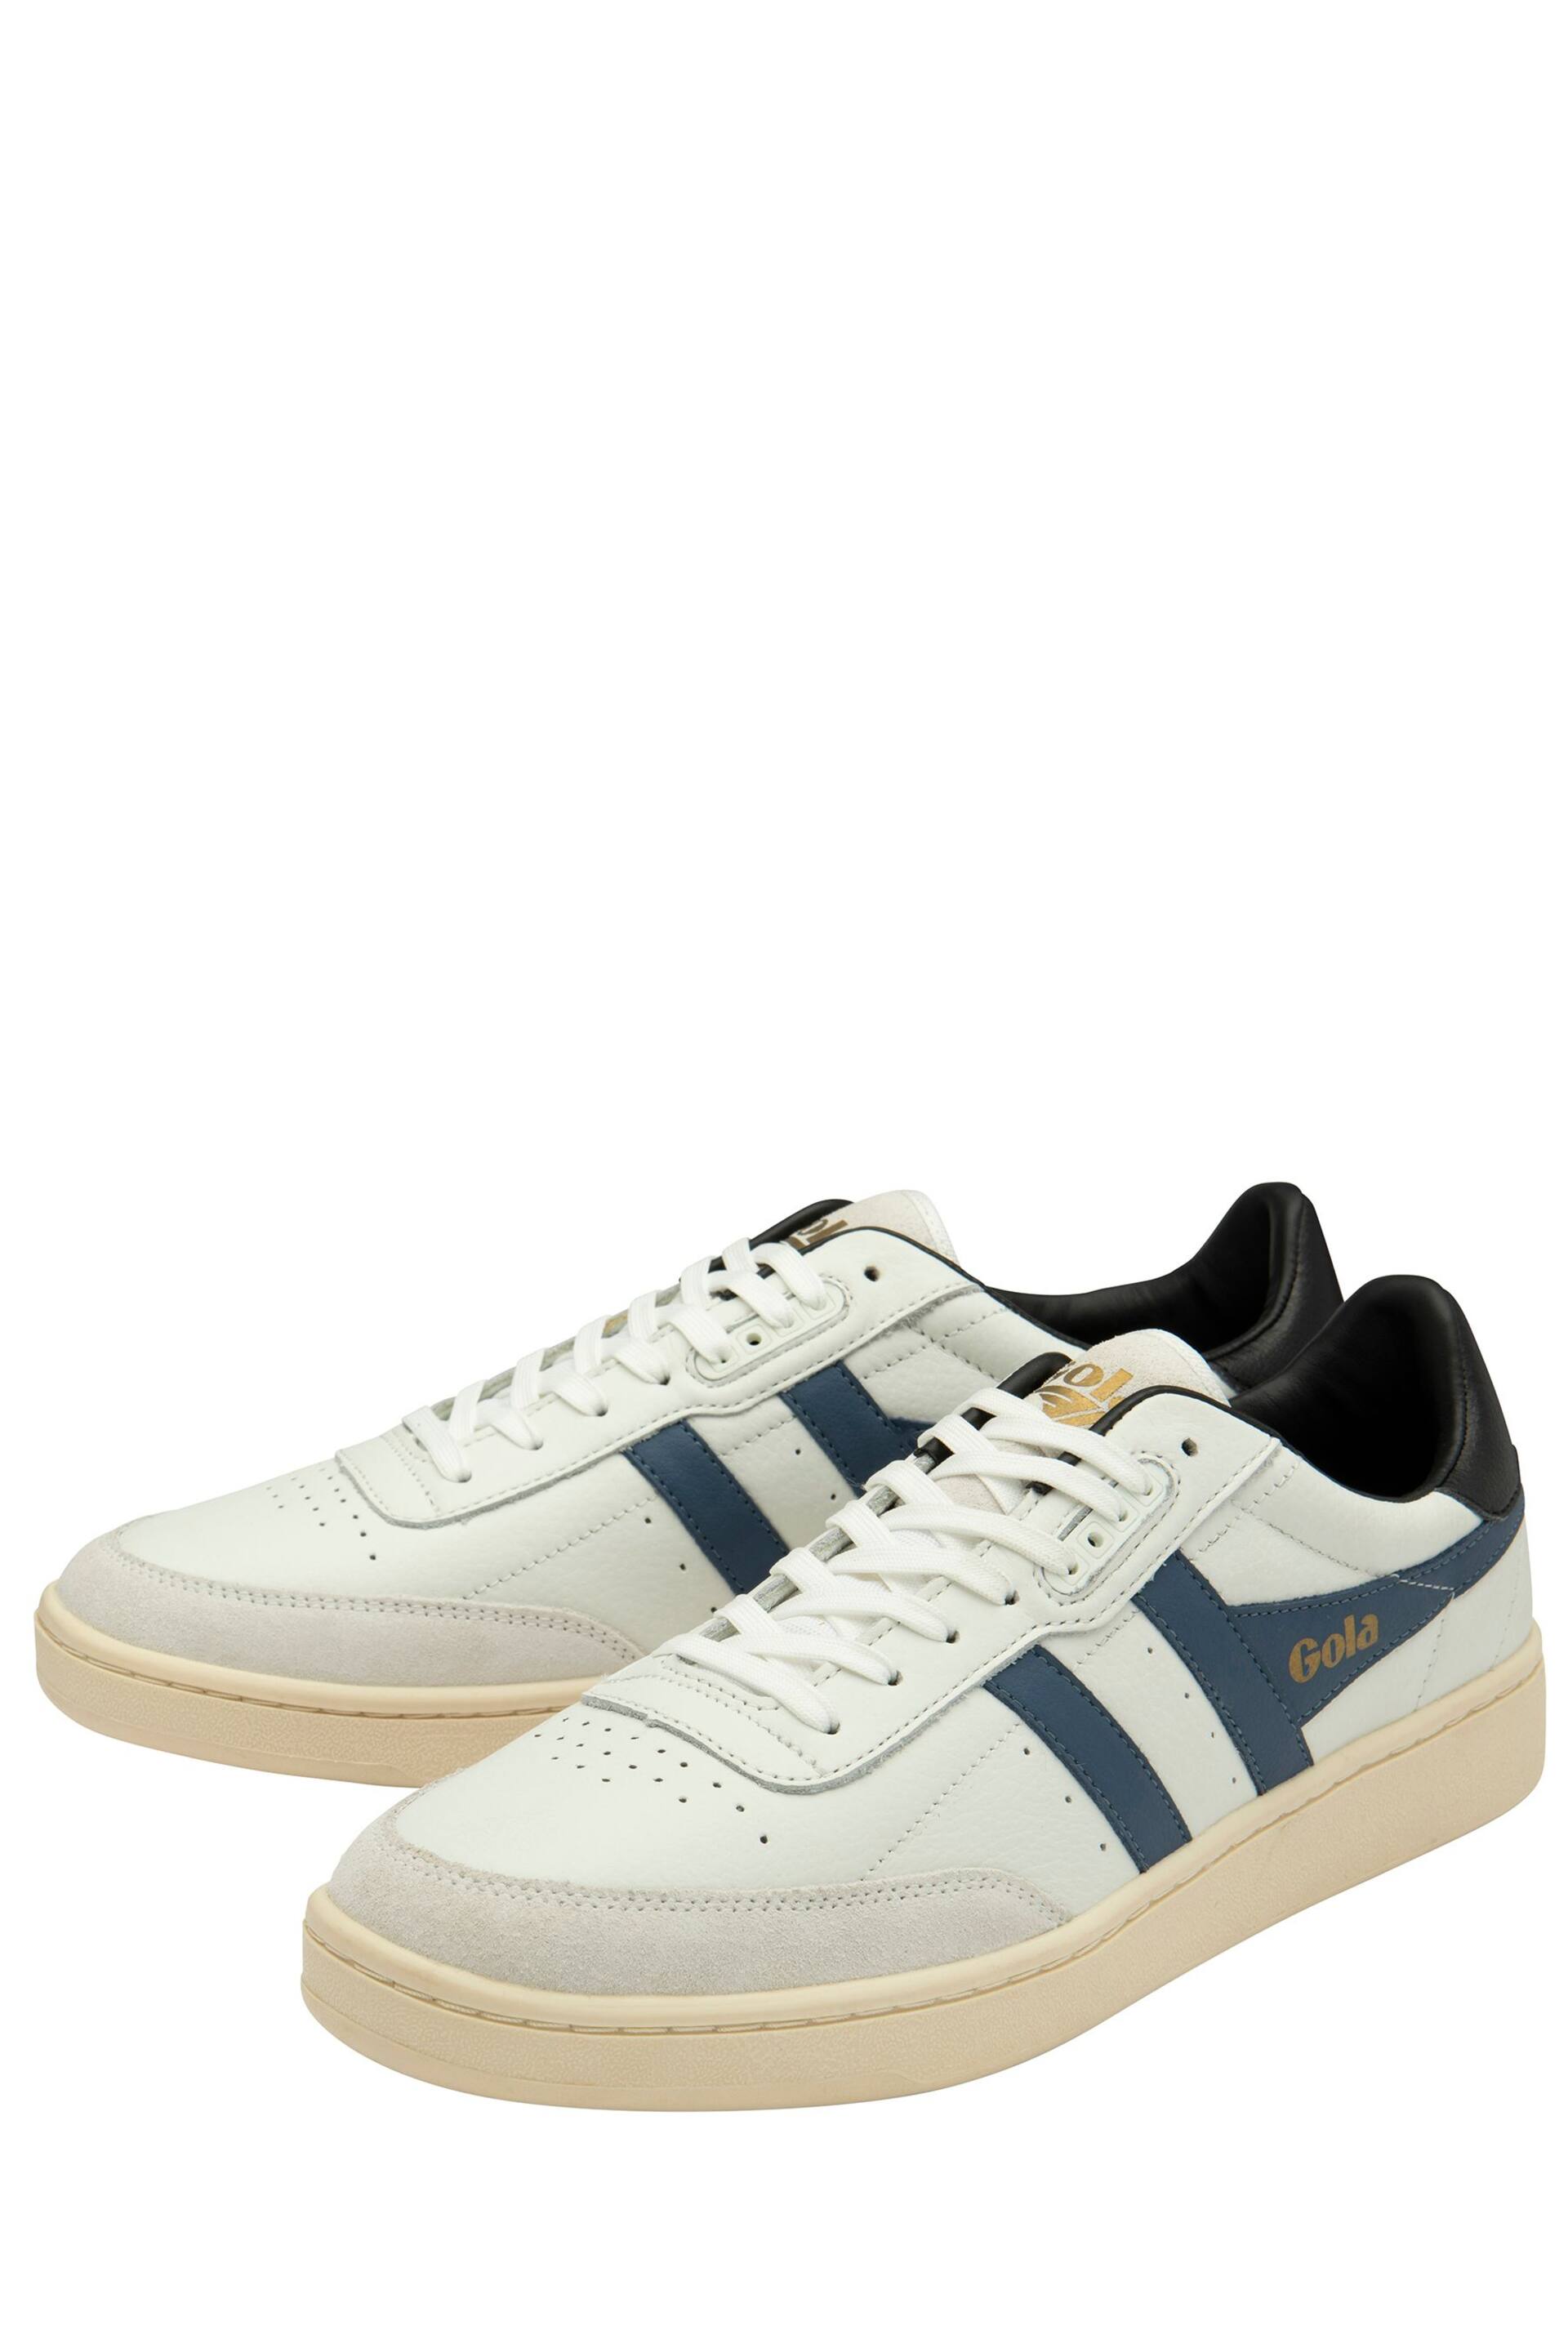 Gola White Mens  Contact Leather Lace-Up Trainers - Image 2 of 4